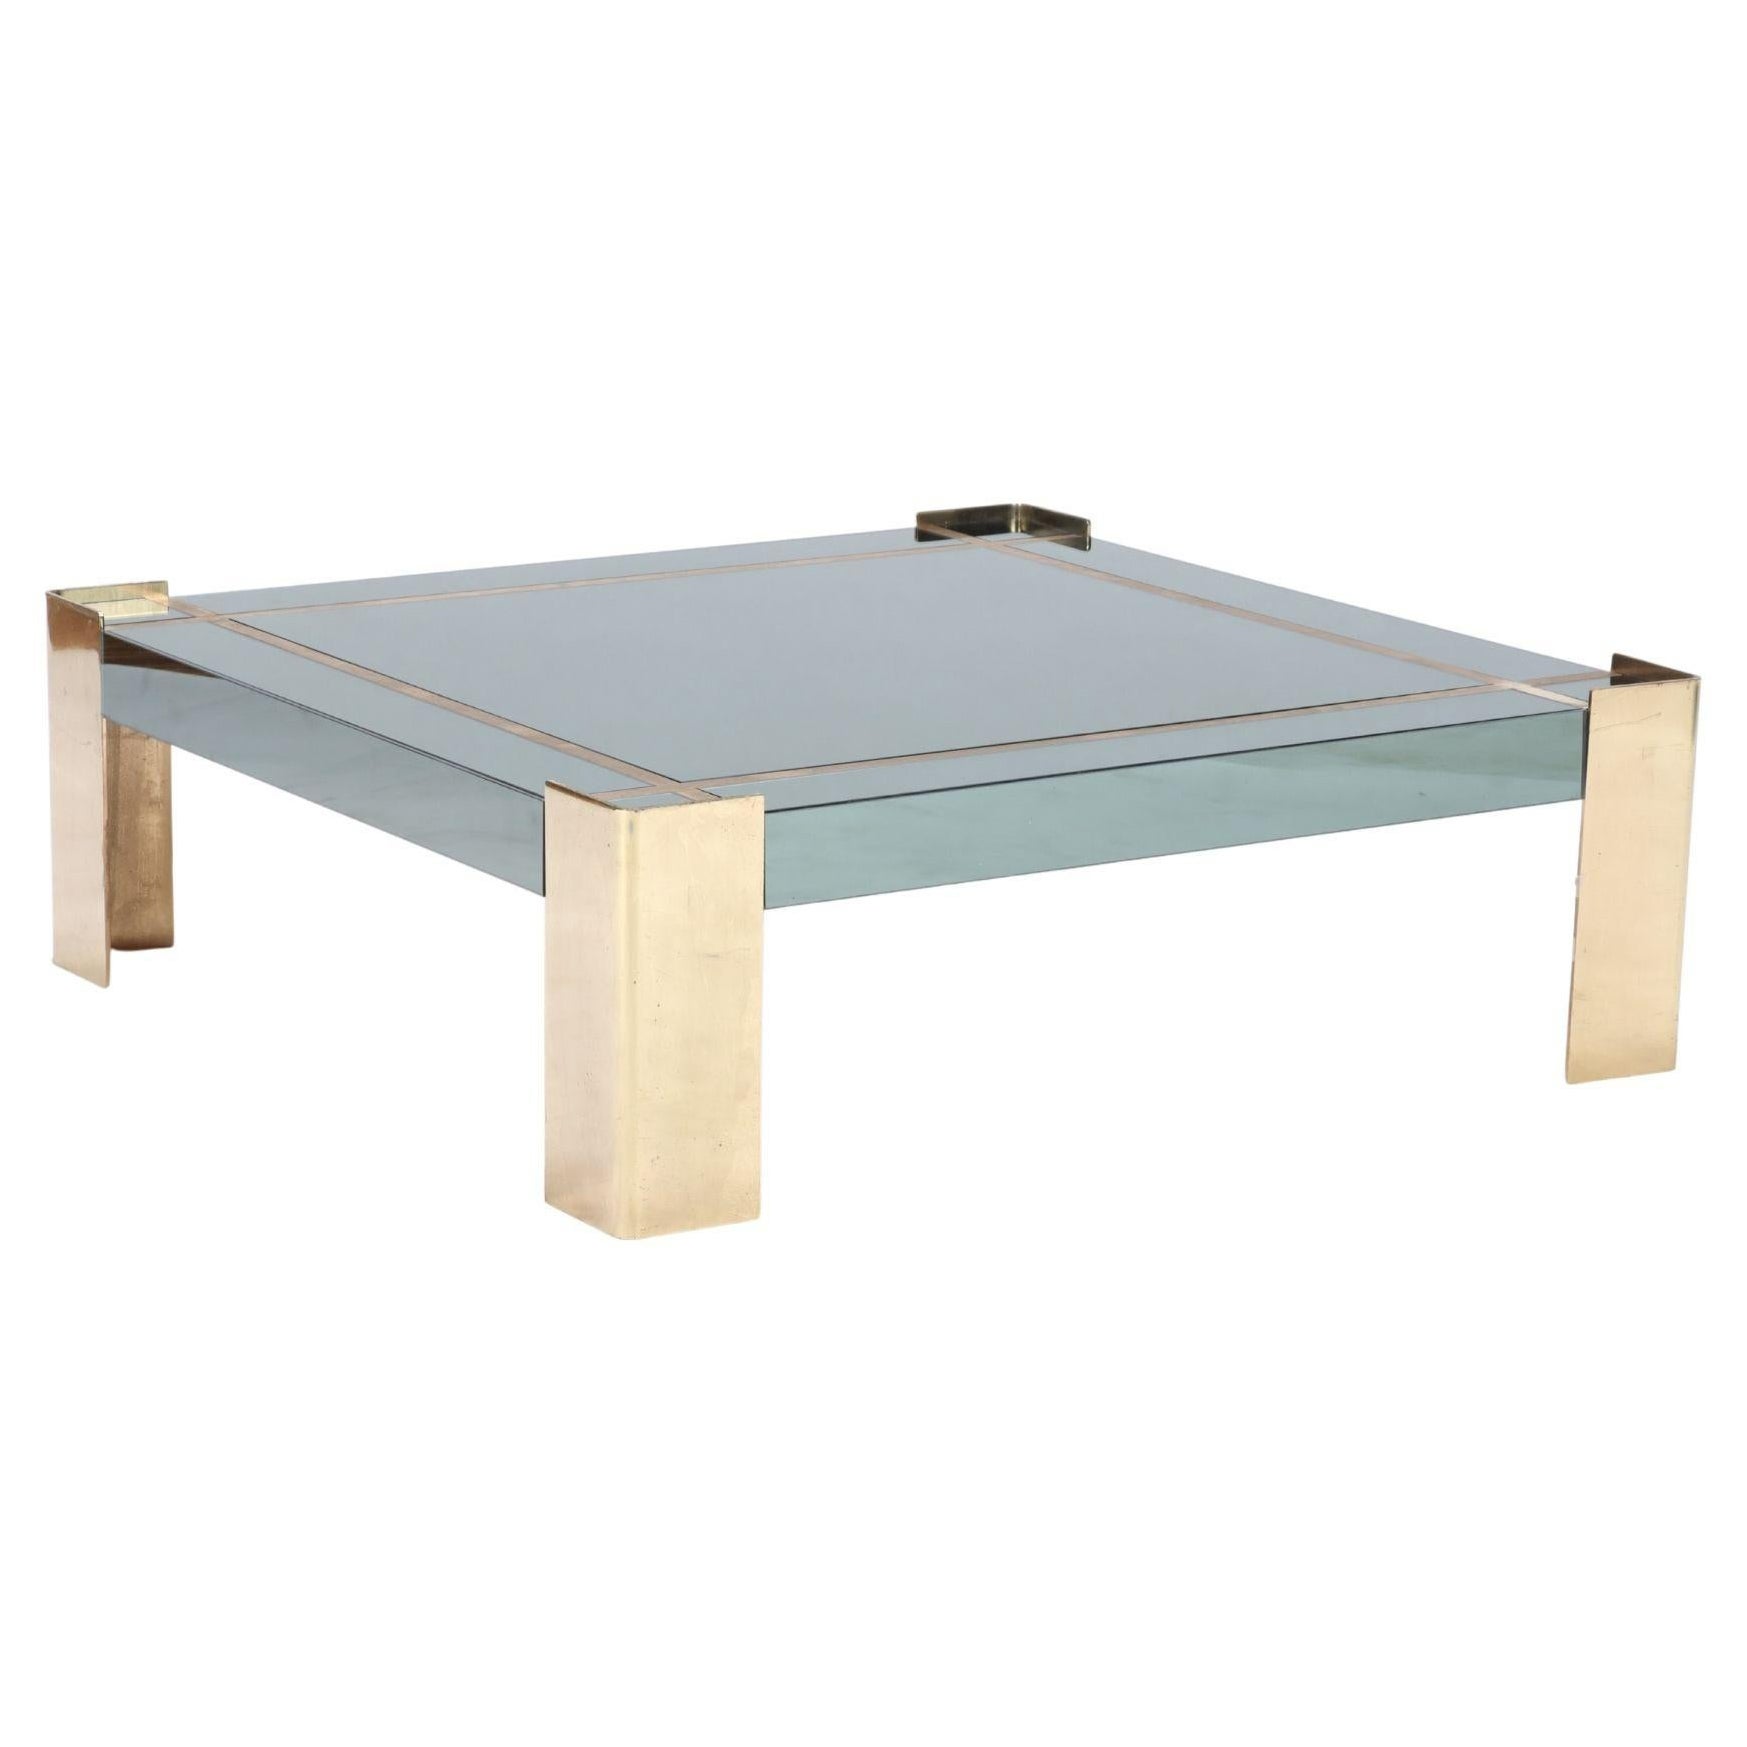 Mid-Century Modern Glass Top Coffee Table with Brass Legs and Trim, Circa 1970